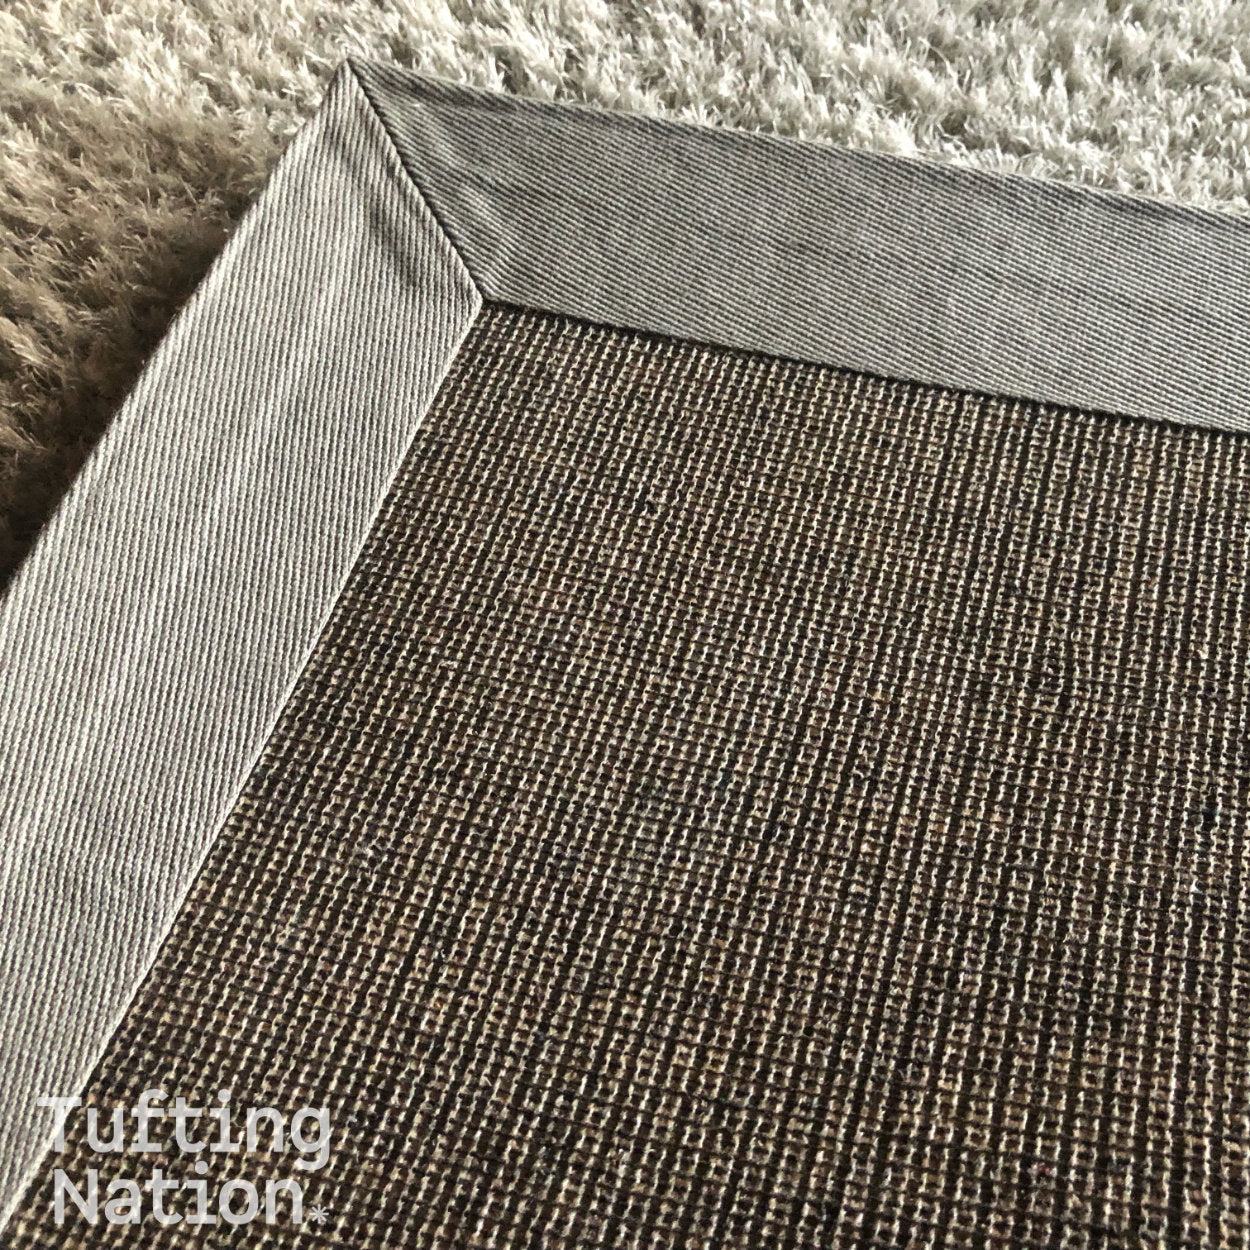 HOW TO BACK & FINISH A TUFTED RUG